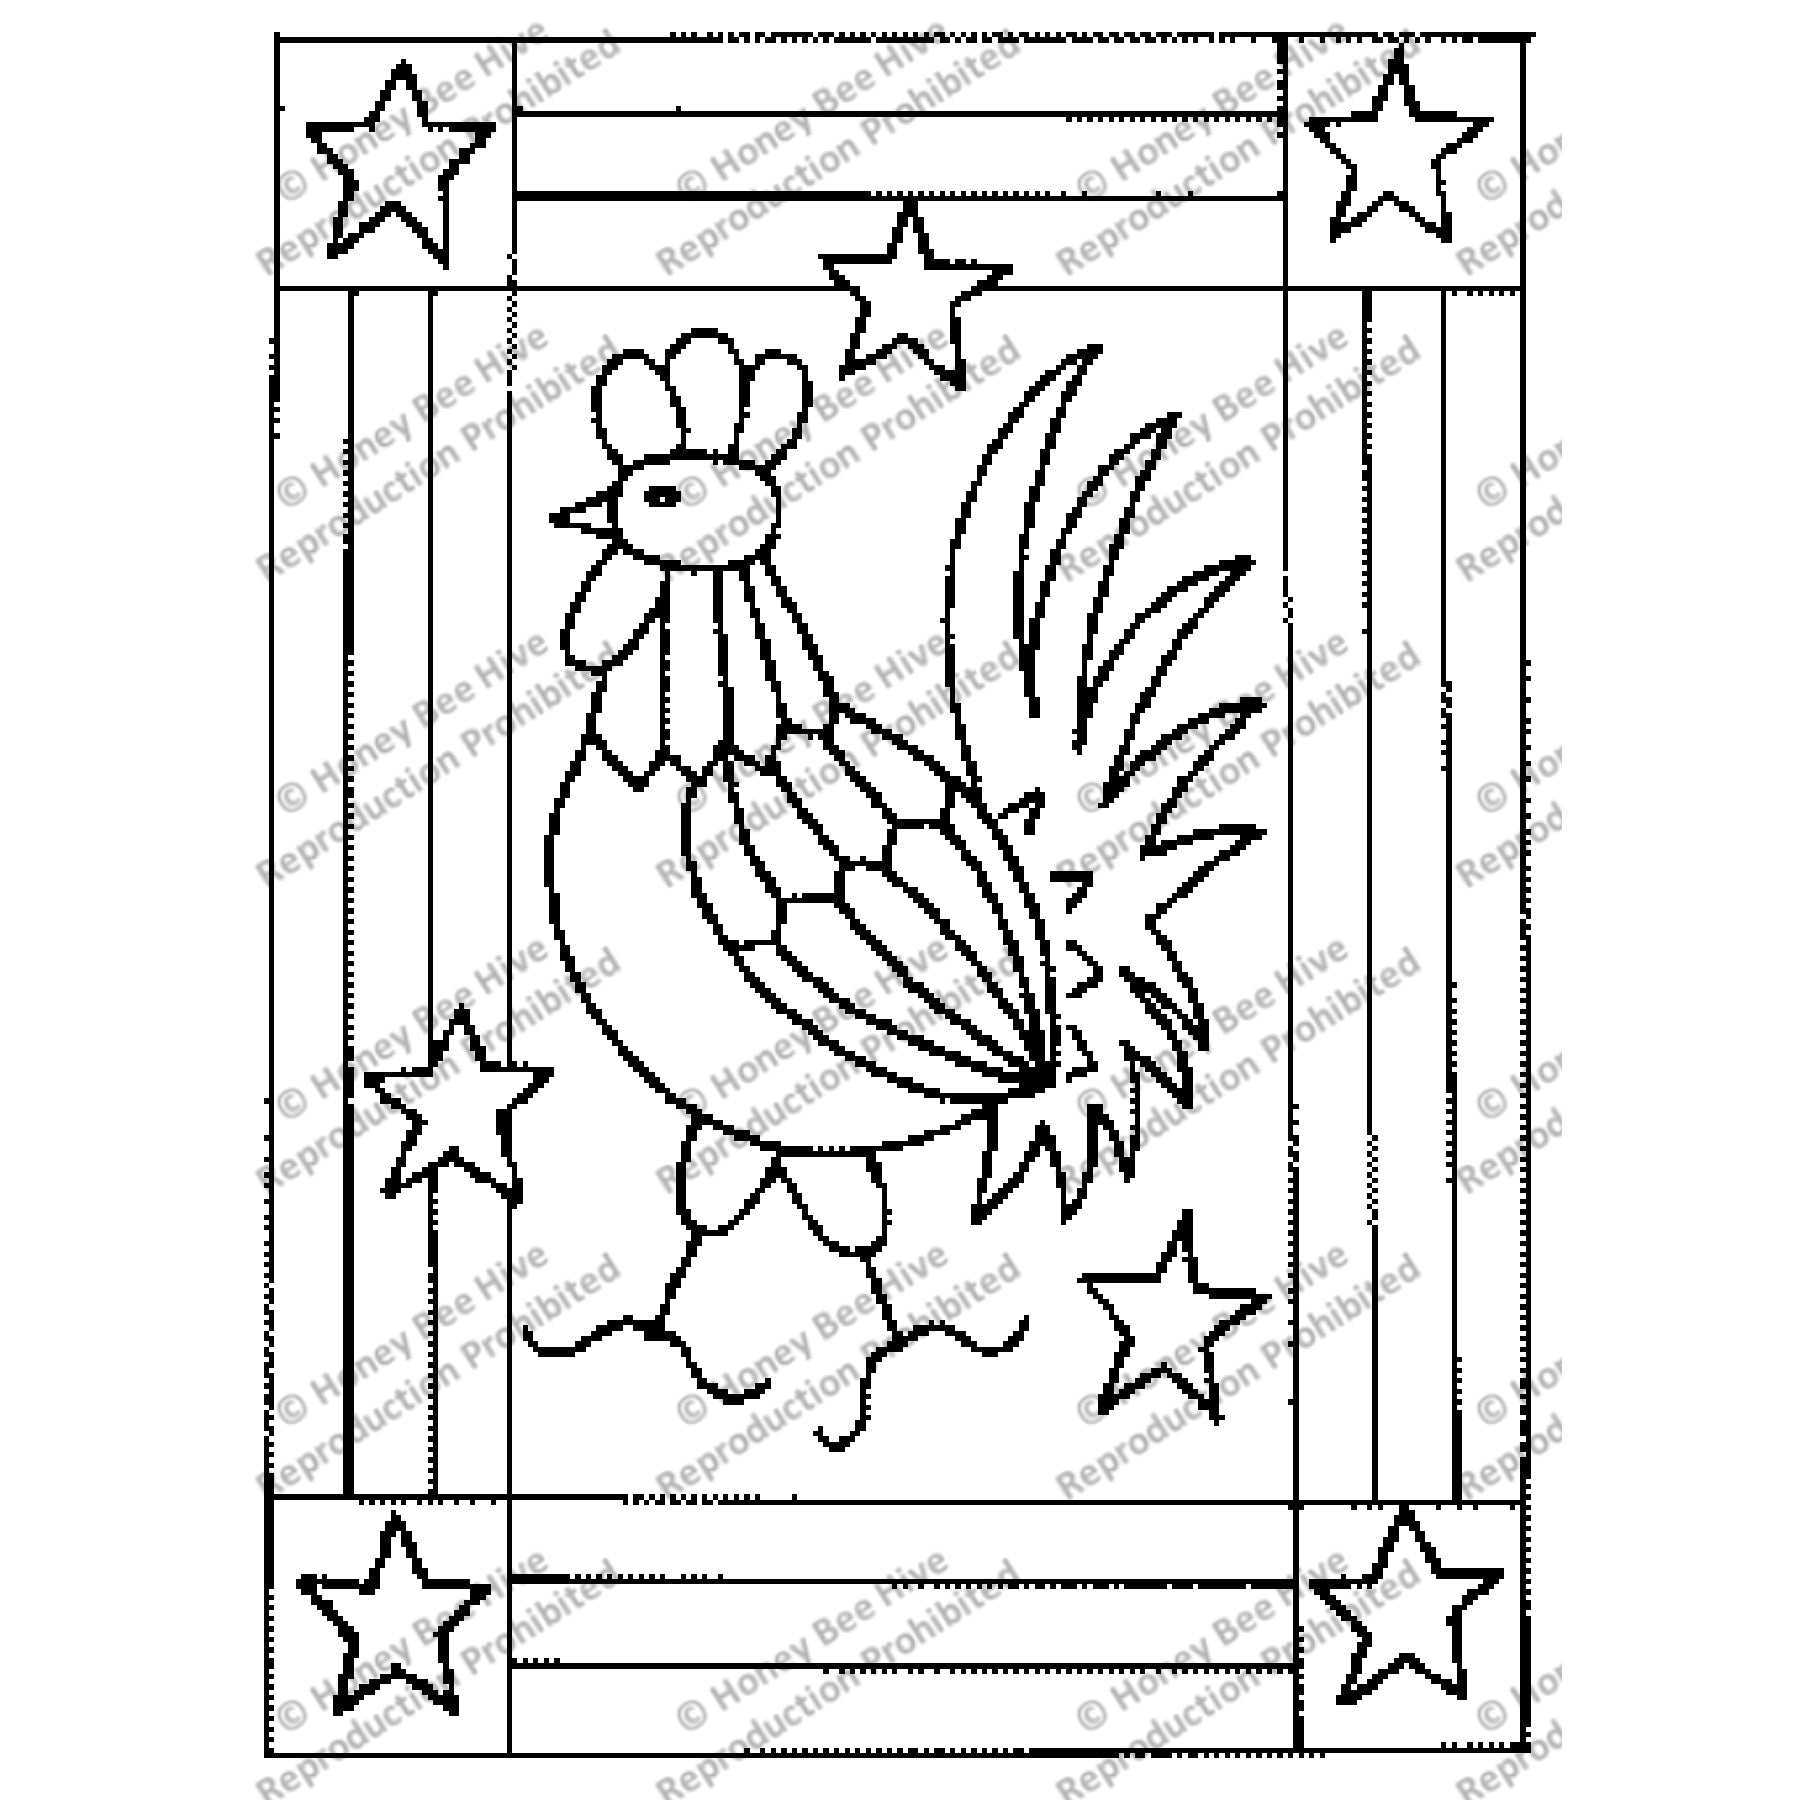 Rhode Island Red White And Blue, rug hooking pattern